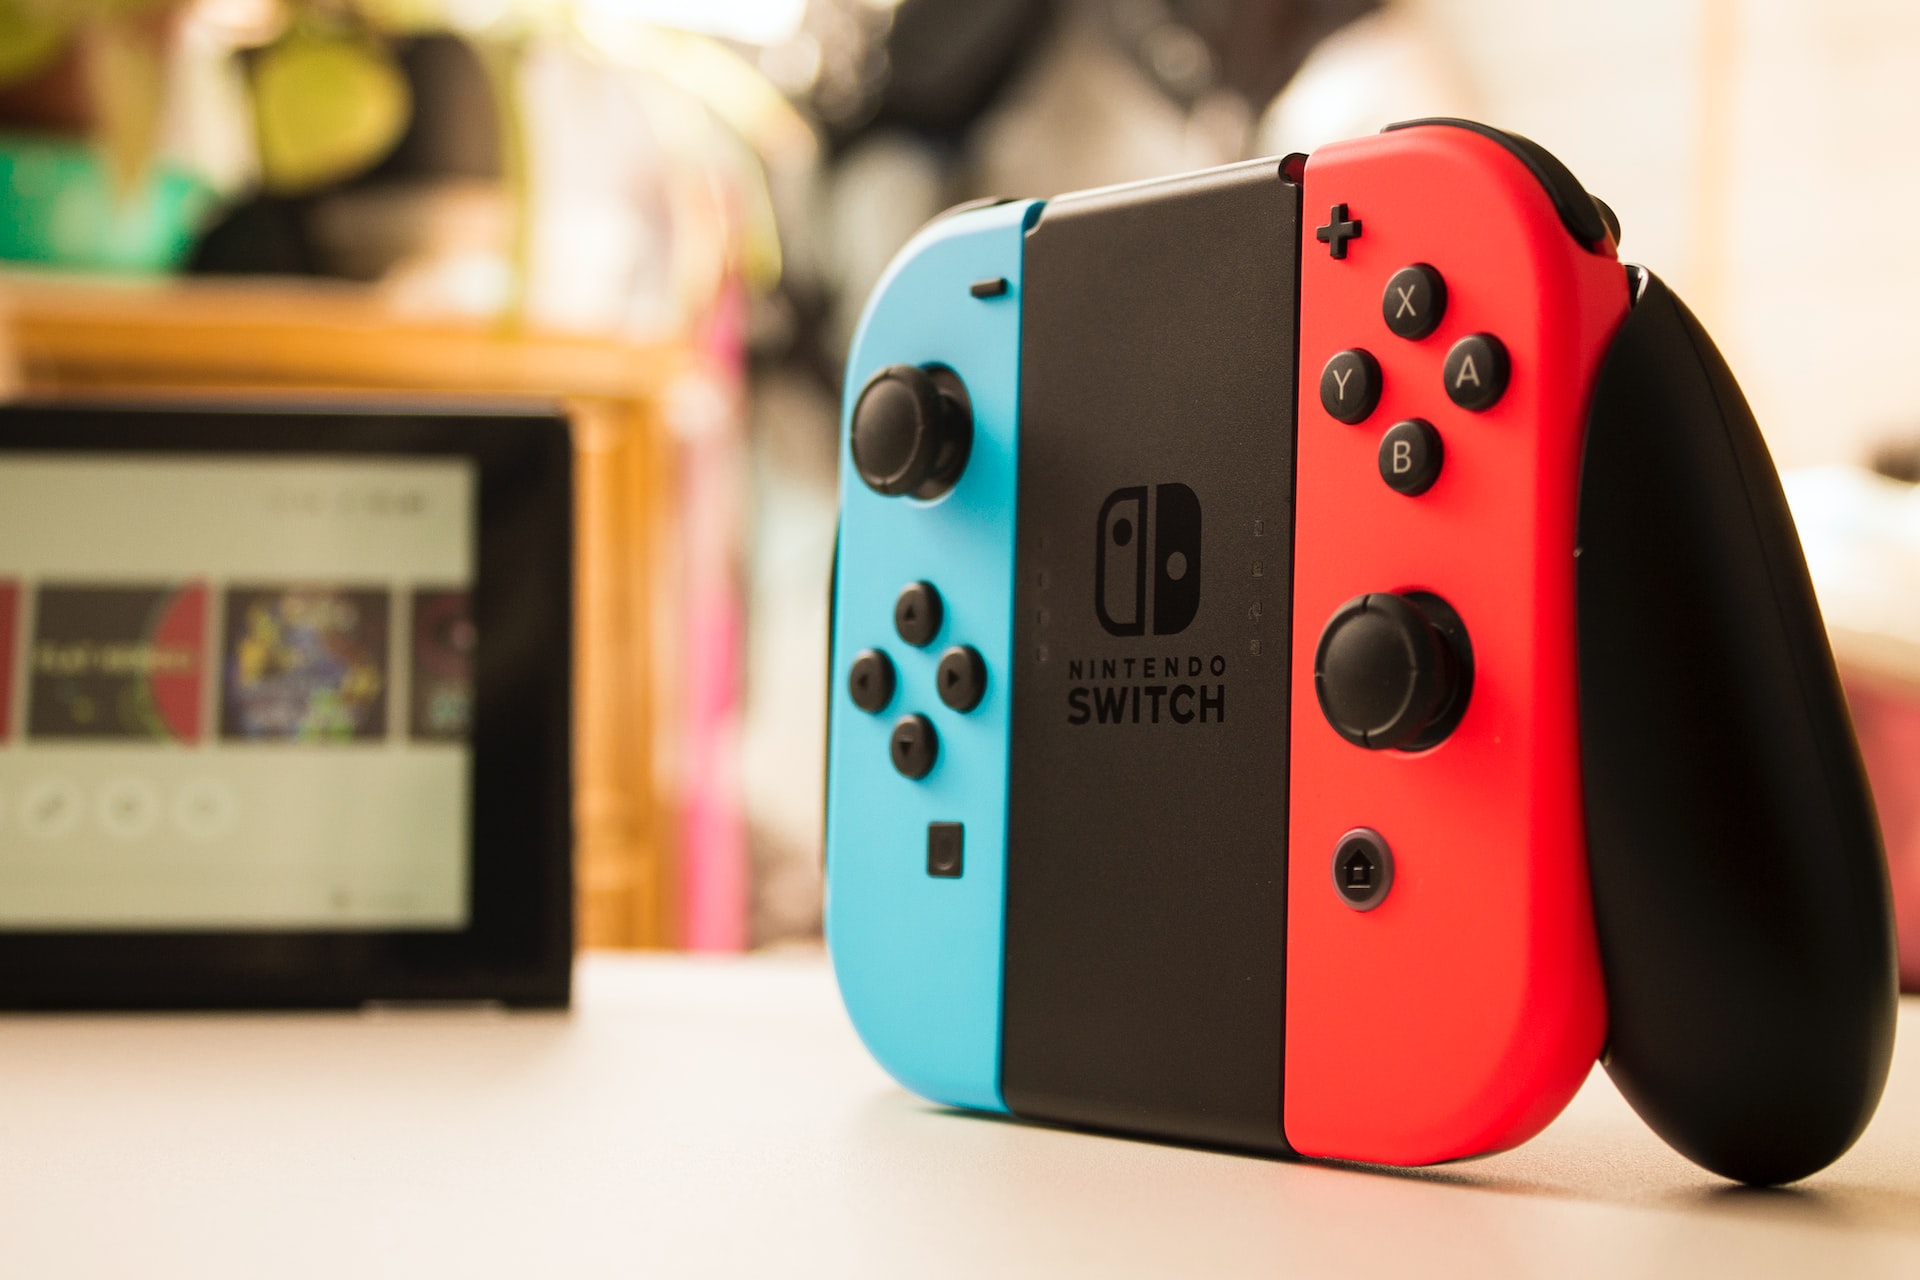 Nintendo Switch vs. Lite: Which Should You Buy?